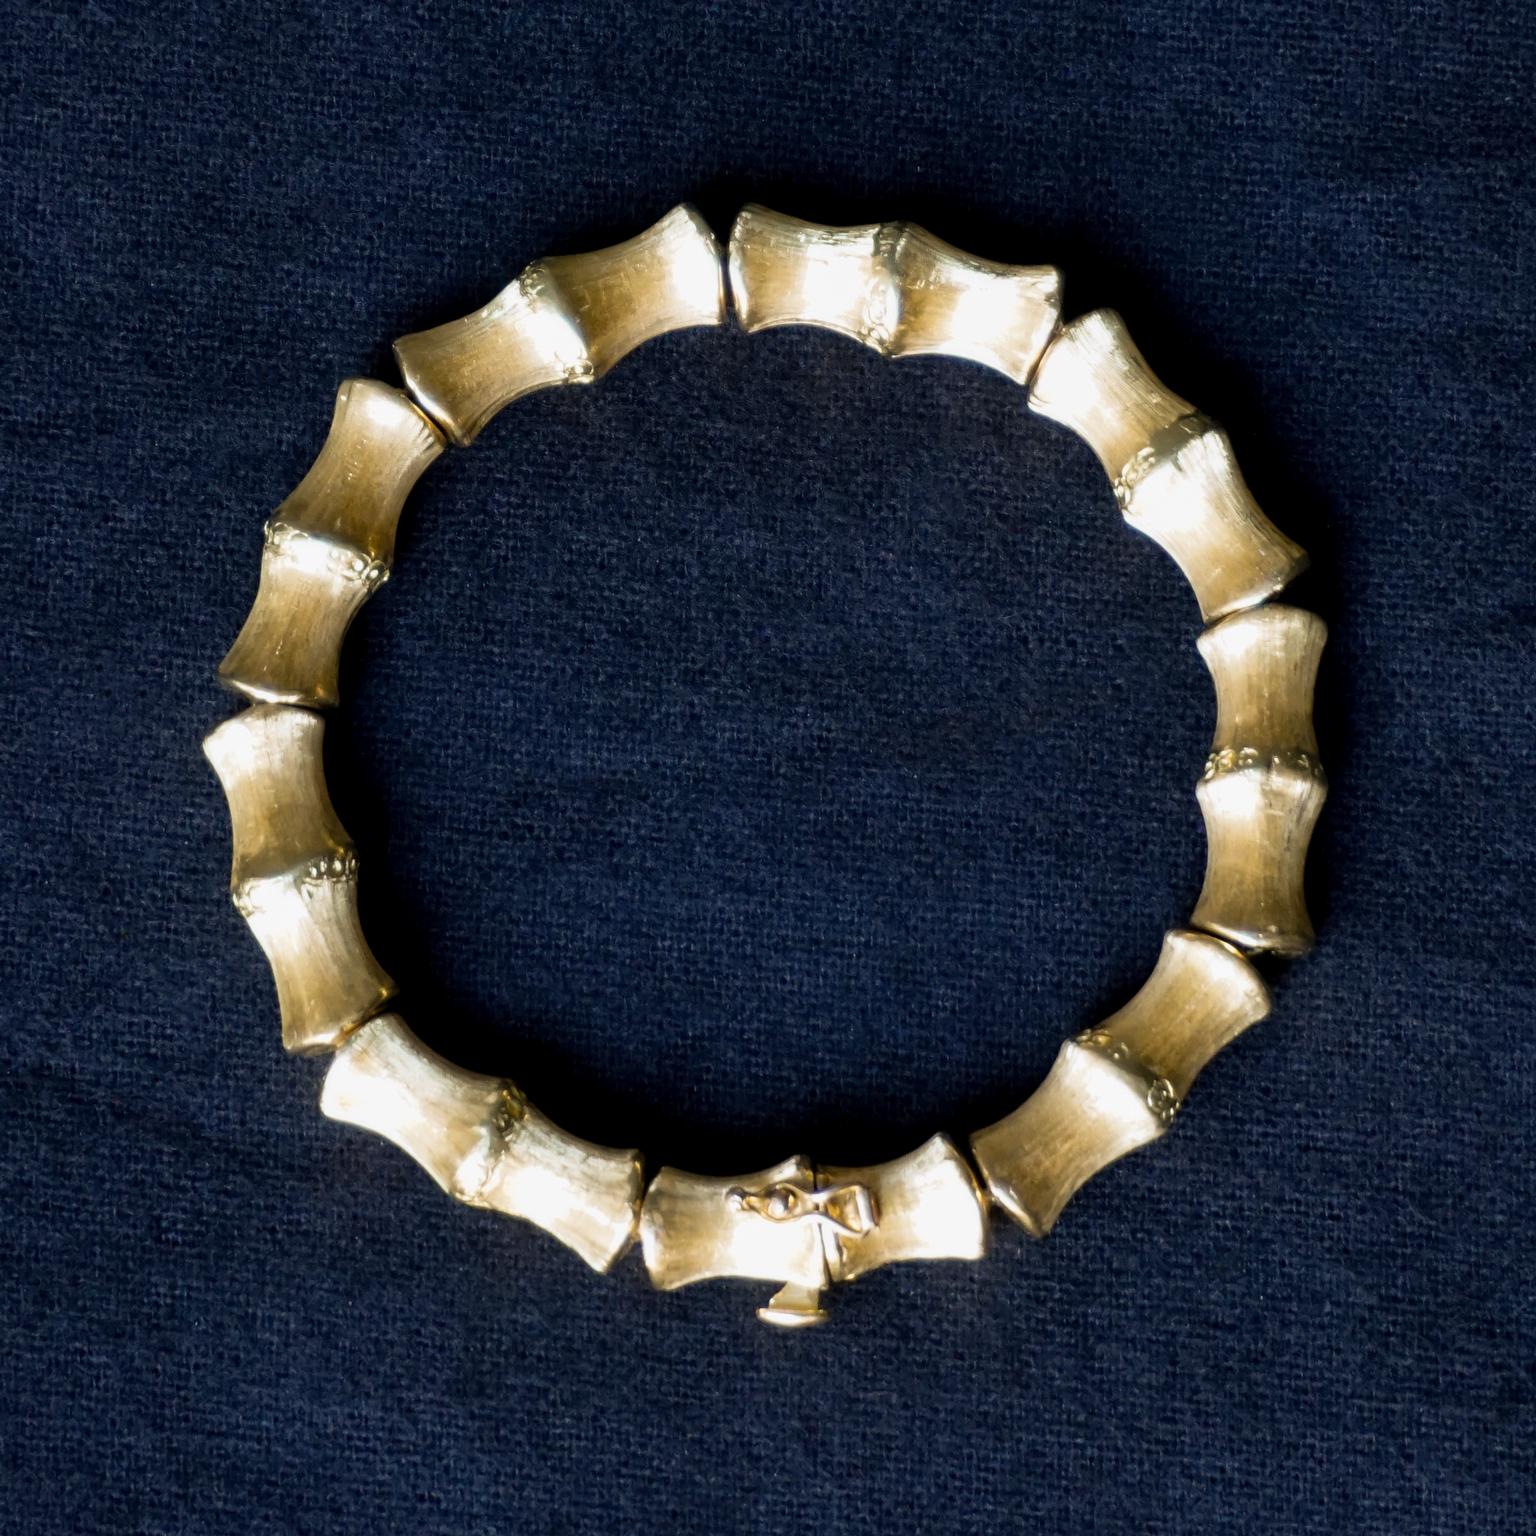 Vintage Classic 18-karat gold faux-bamboo Italian, Vincenza made bracelet.
Consists of nine gold etched and brushed finish bamboo segments which, when closed, form a solid heavy (33gr) gold bangle bracelet with a diameter of 6cm (2.4 inch). 
Marked